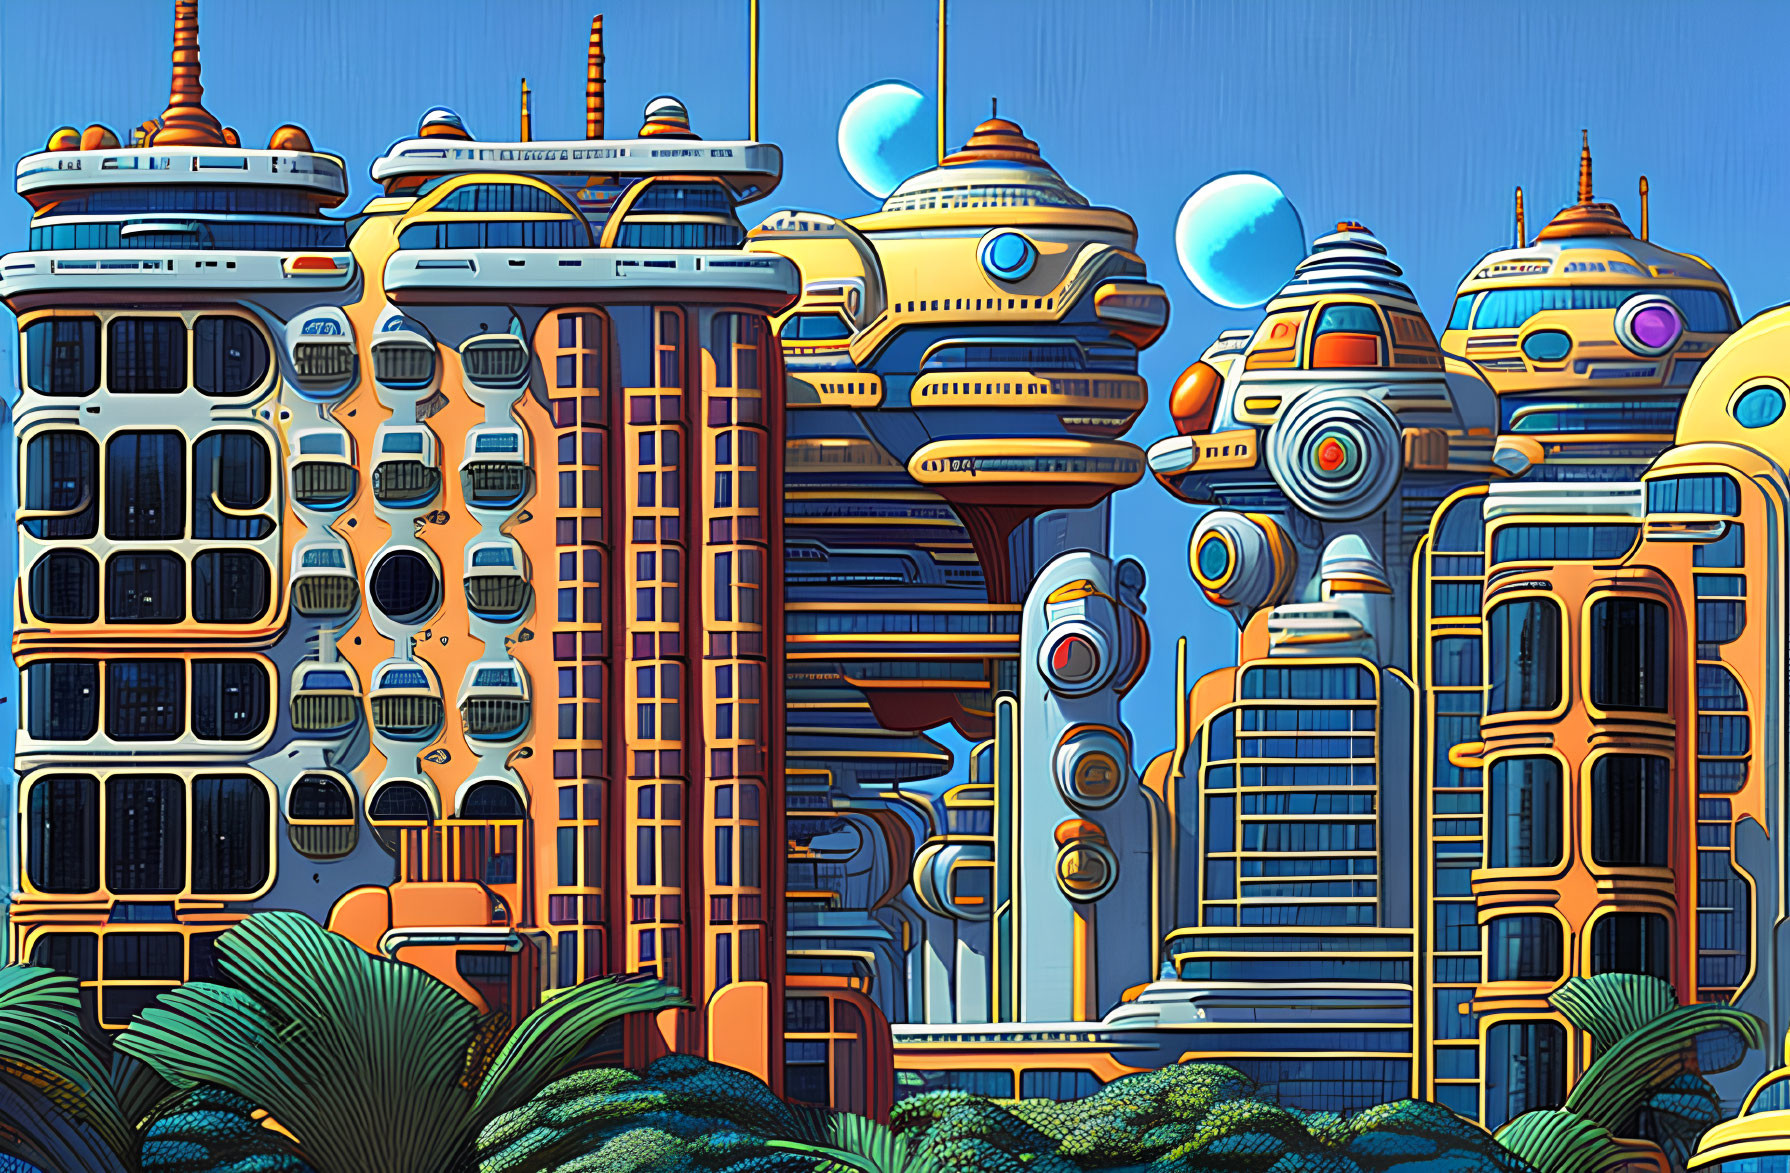 Futuristic cityscape with stylized skyscrapers and domes under blue sky